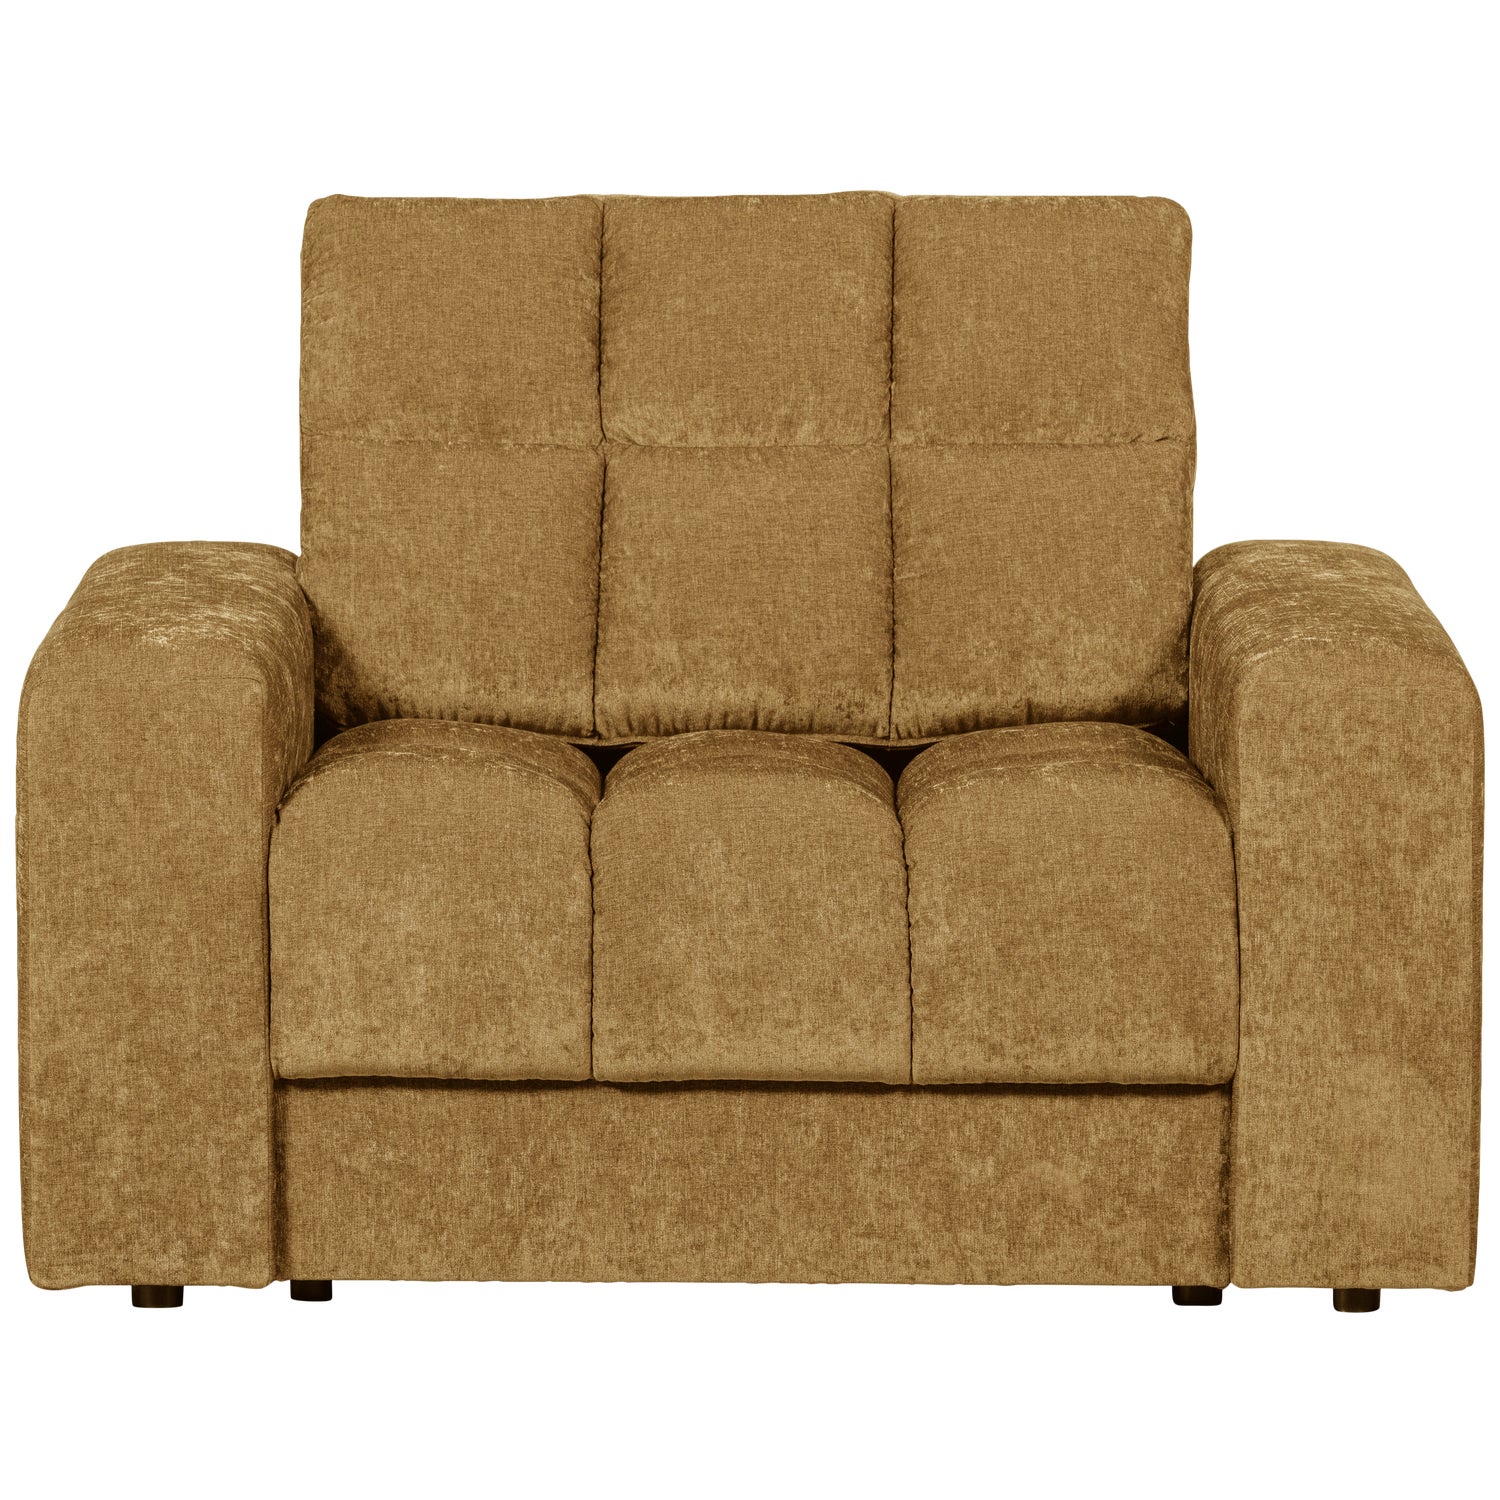 379003-O-01_VS_WE_Second_date_fauteuil_vintage_goud.png?auto=webp&format=png&width=1500&height=1500